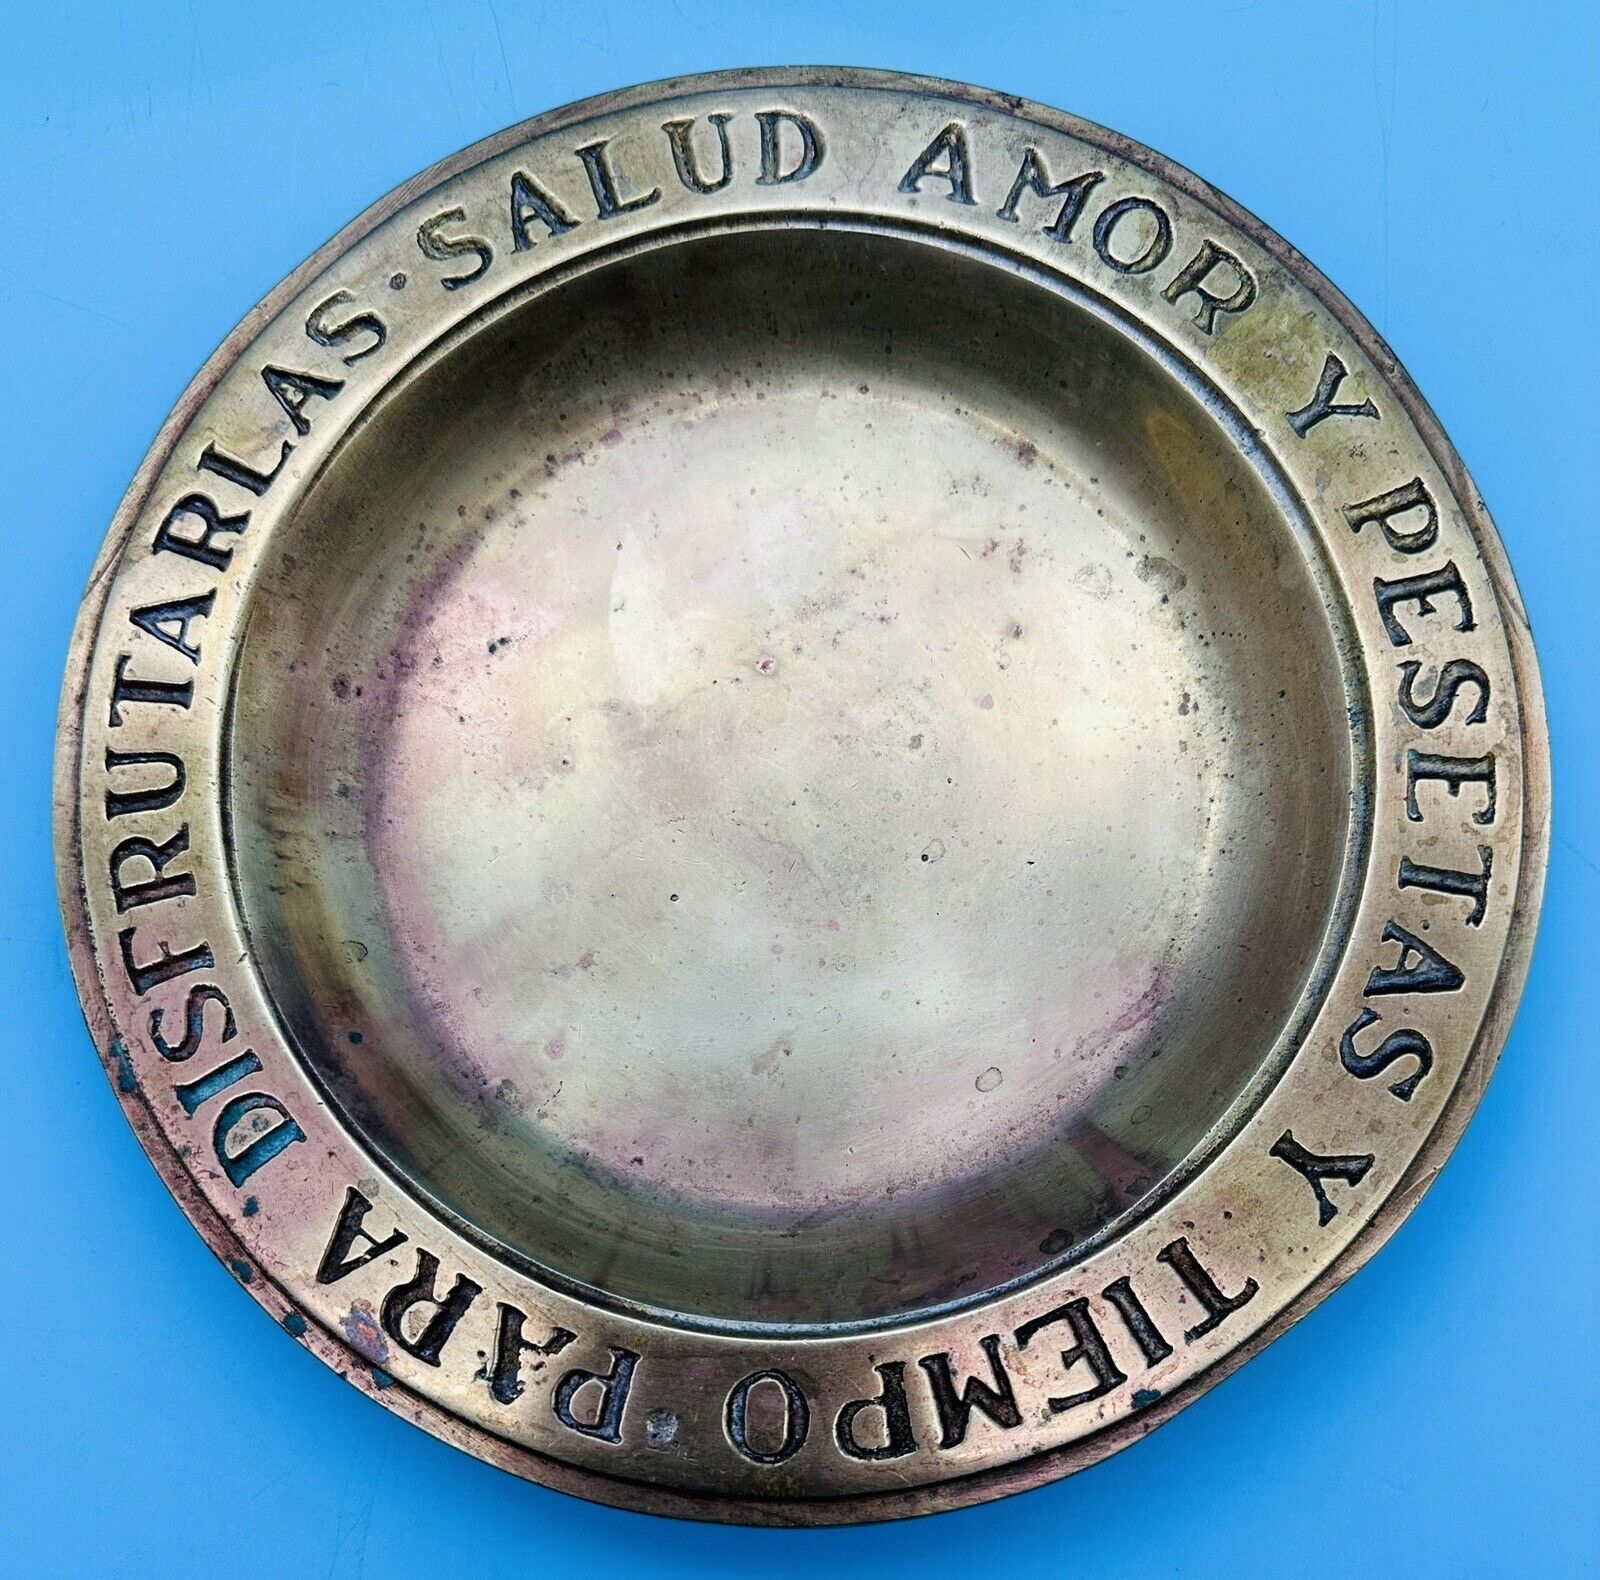 Old Brass Bowl Spanish Toast May you have health love money & time to spend it.